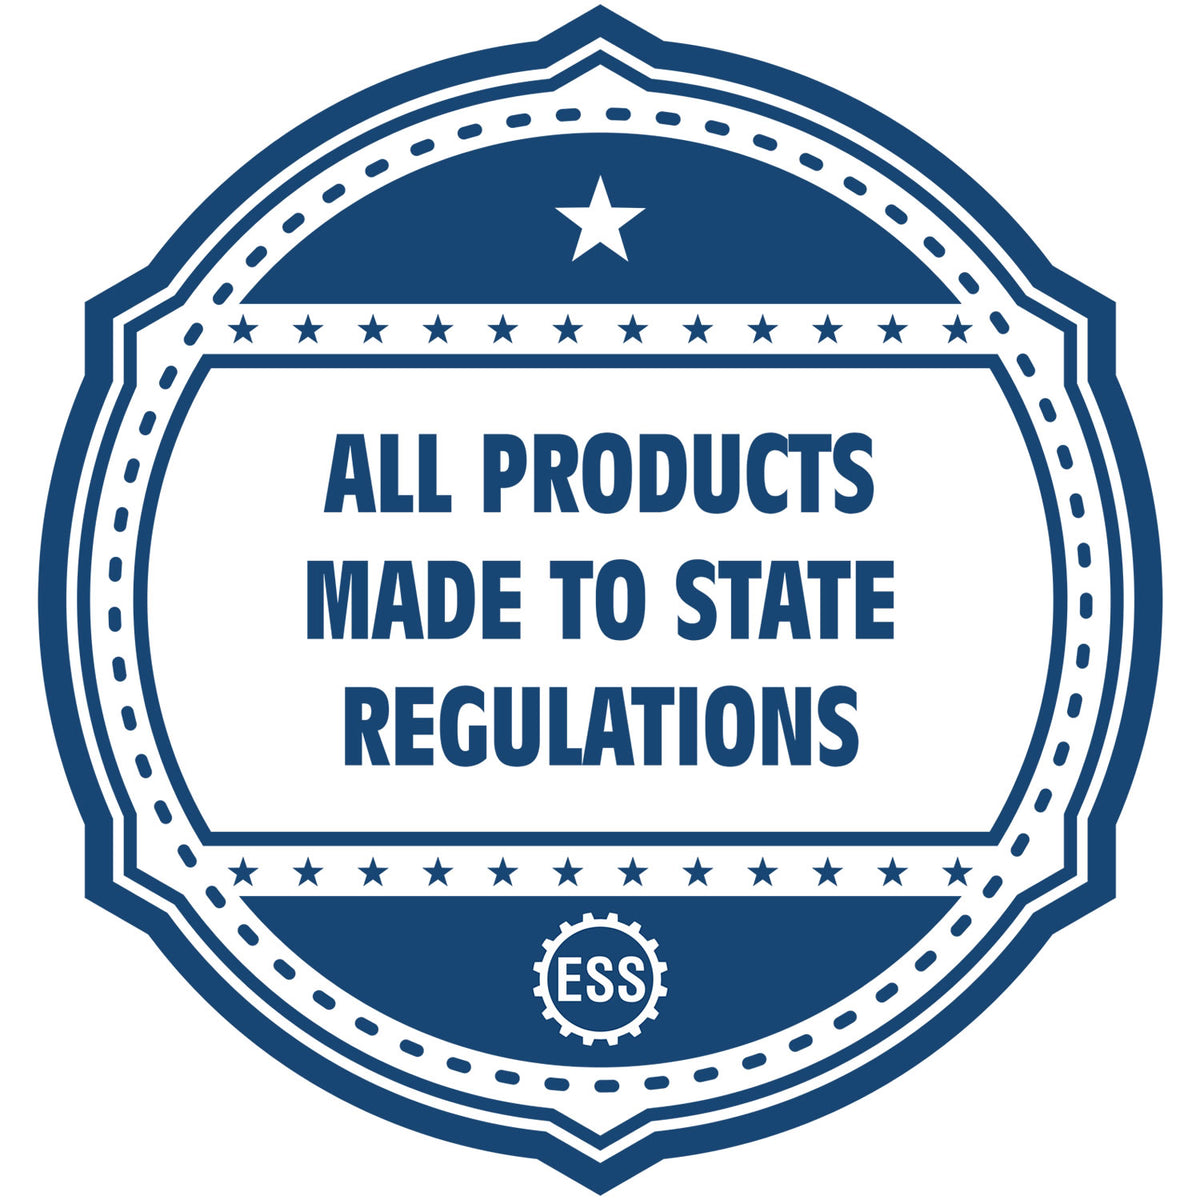 A blue icon or badge for the Hybrid Wyoming Engineer Seal showing that this product is made in compliance with state regulations.